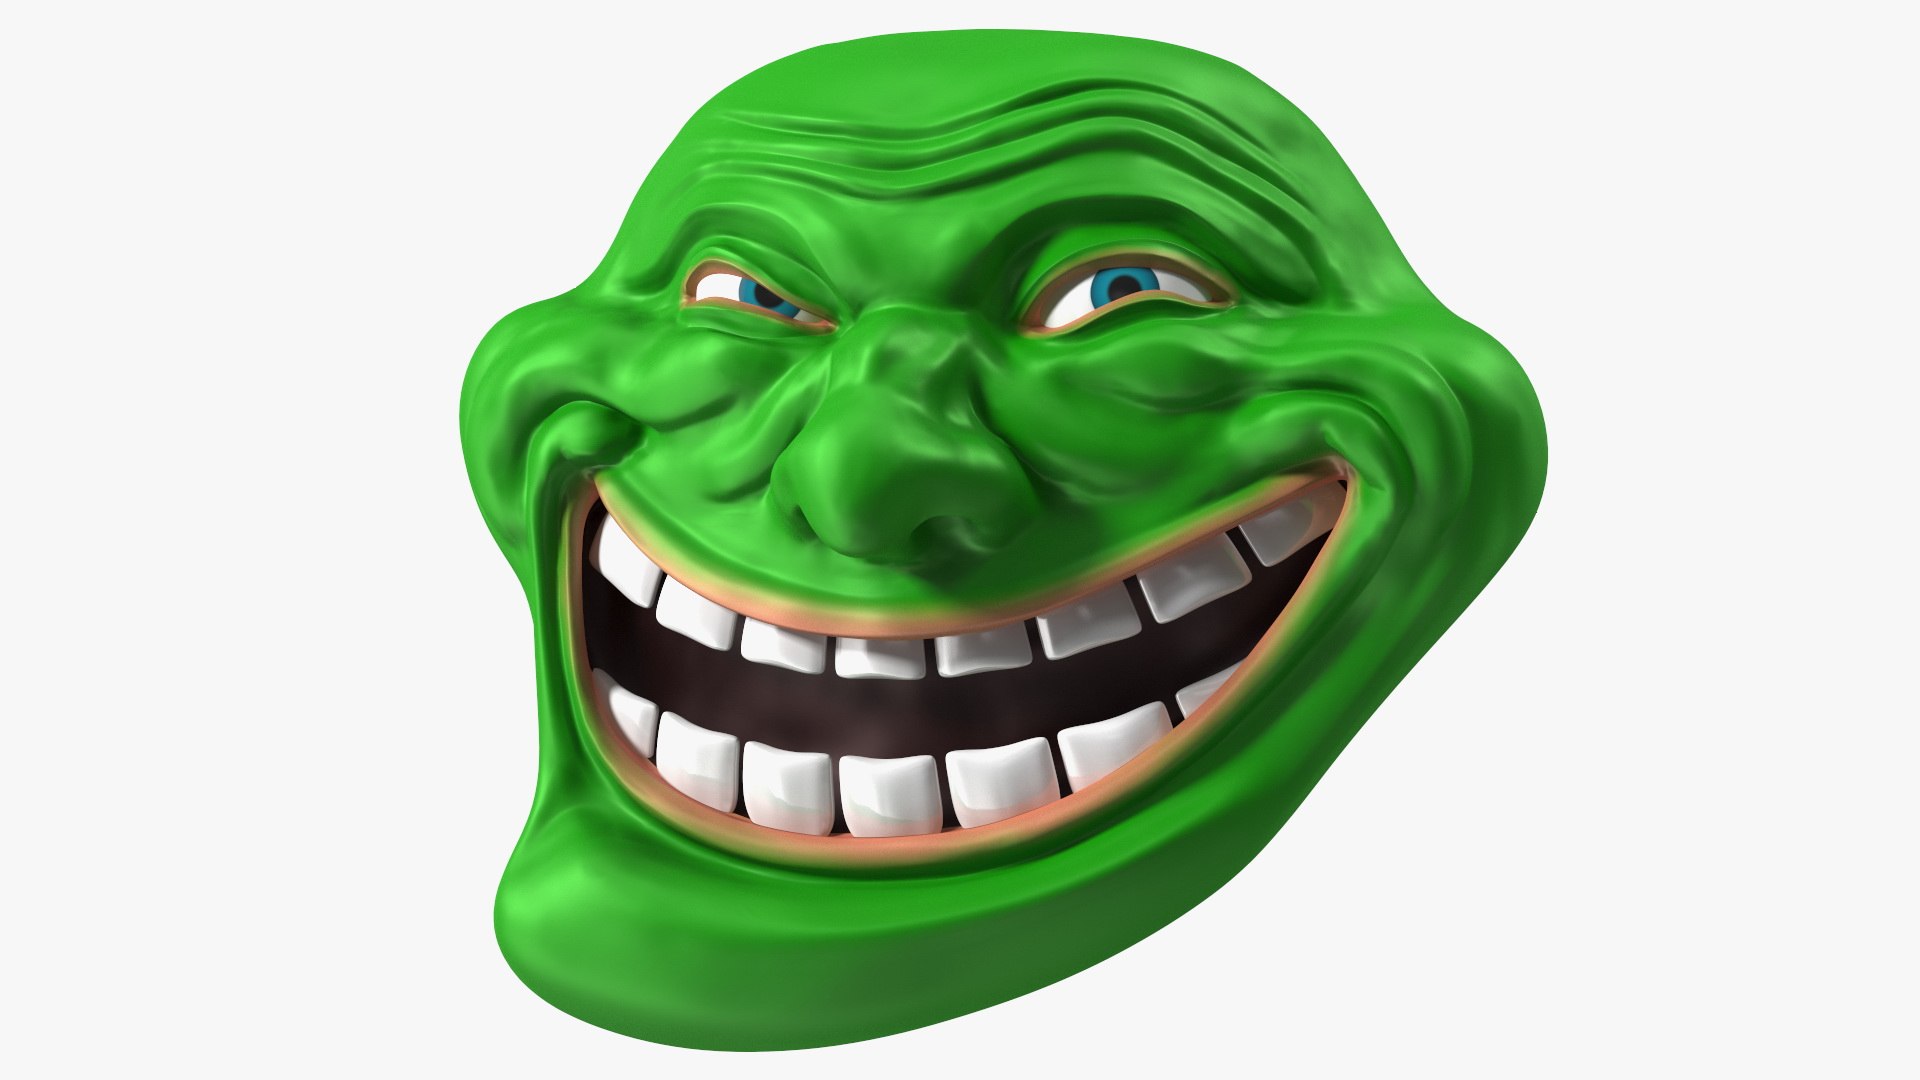 Free Clipart: Troll Face - Problem?